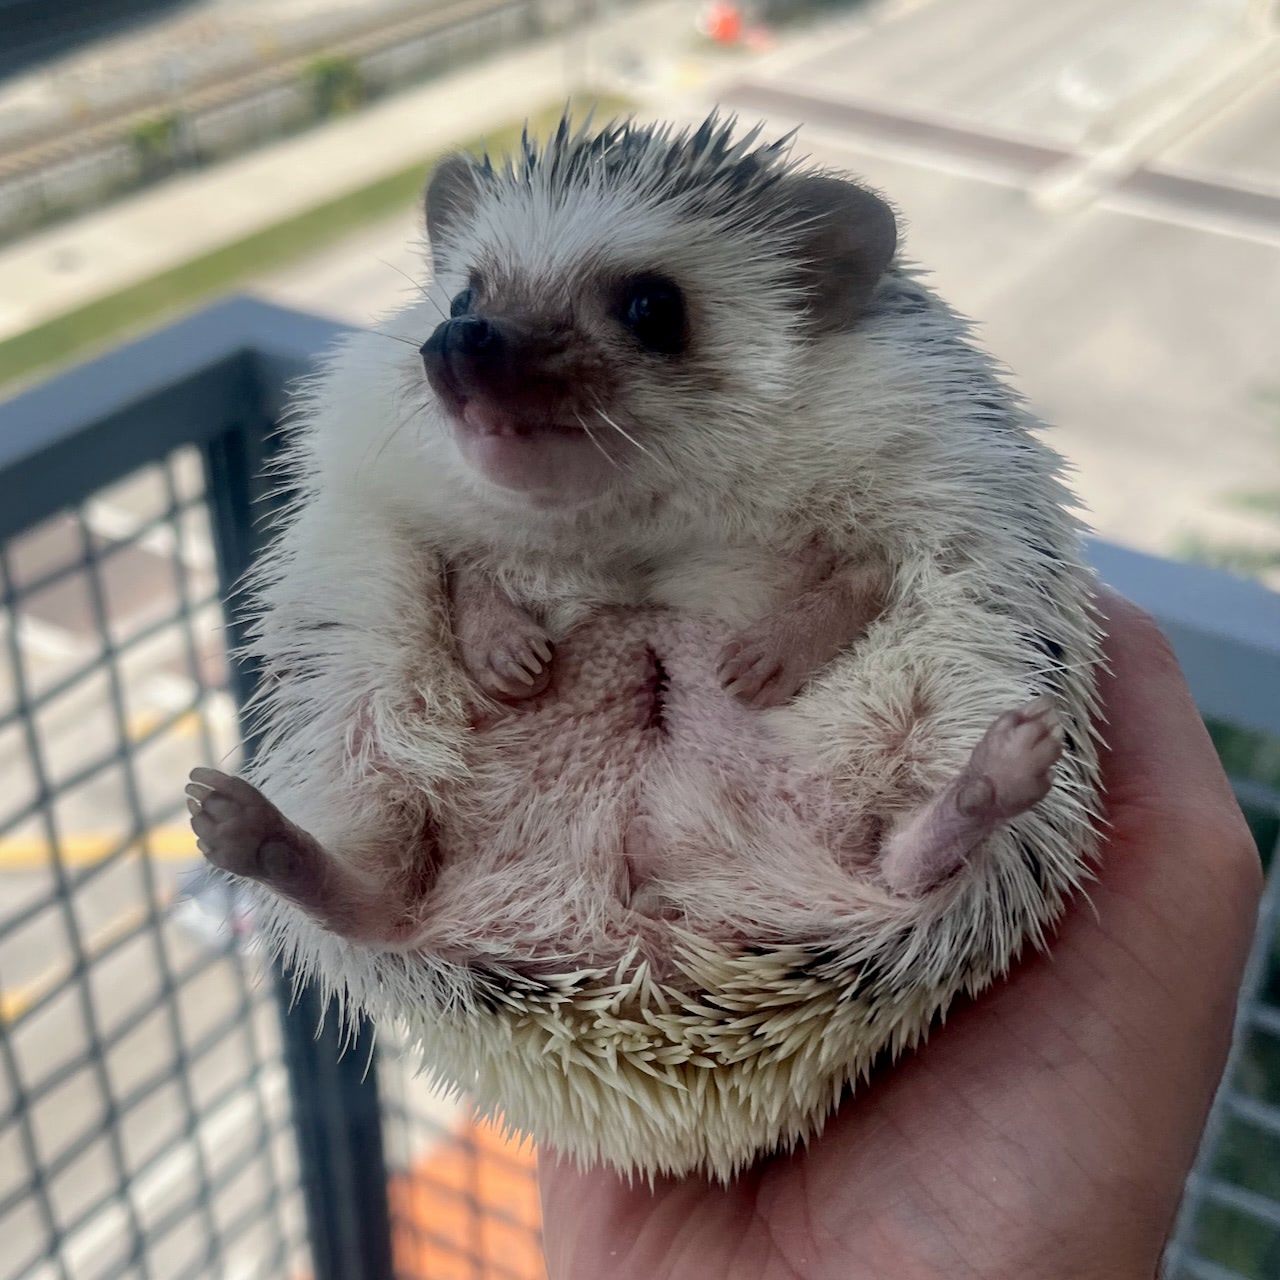 A pygmy hedgehog with a surgery scar across its stomach